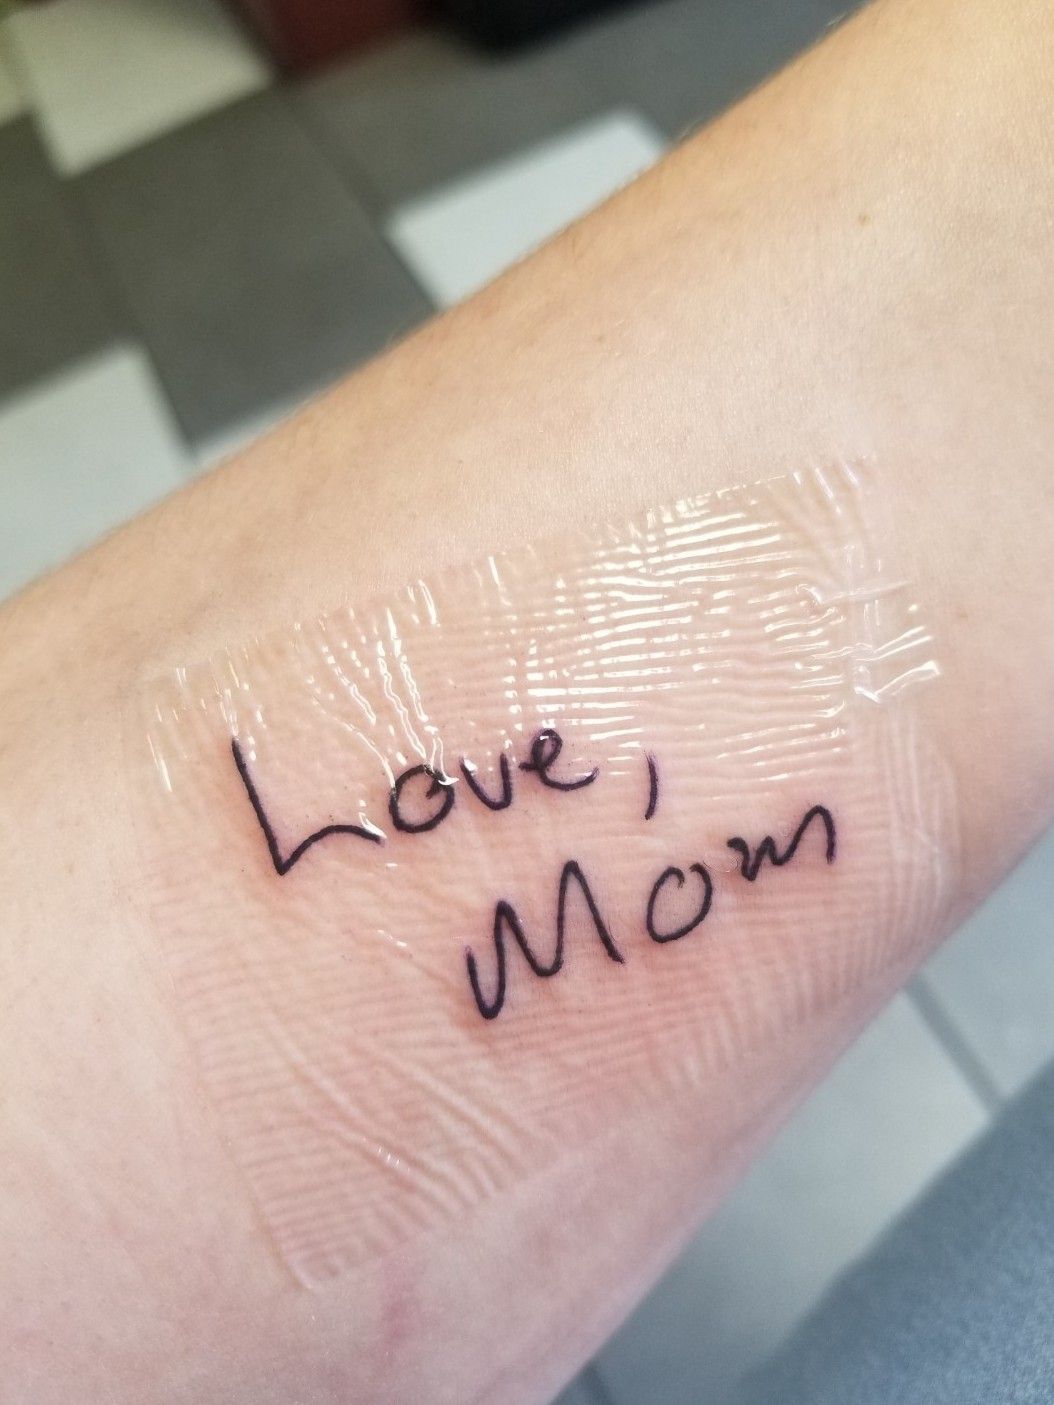 So I was so excited to get this tattoo in my moms handwriting that I didnt  bother to proof read  rtattoo